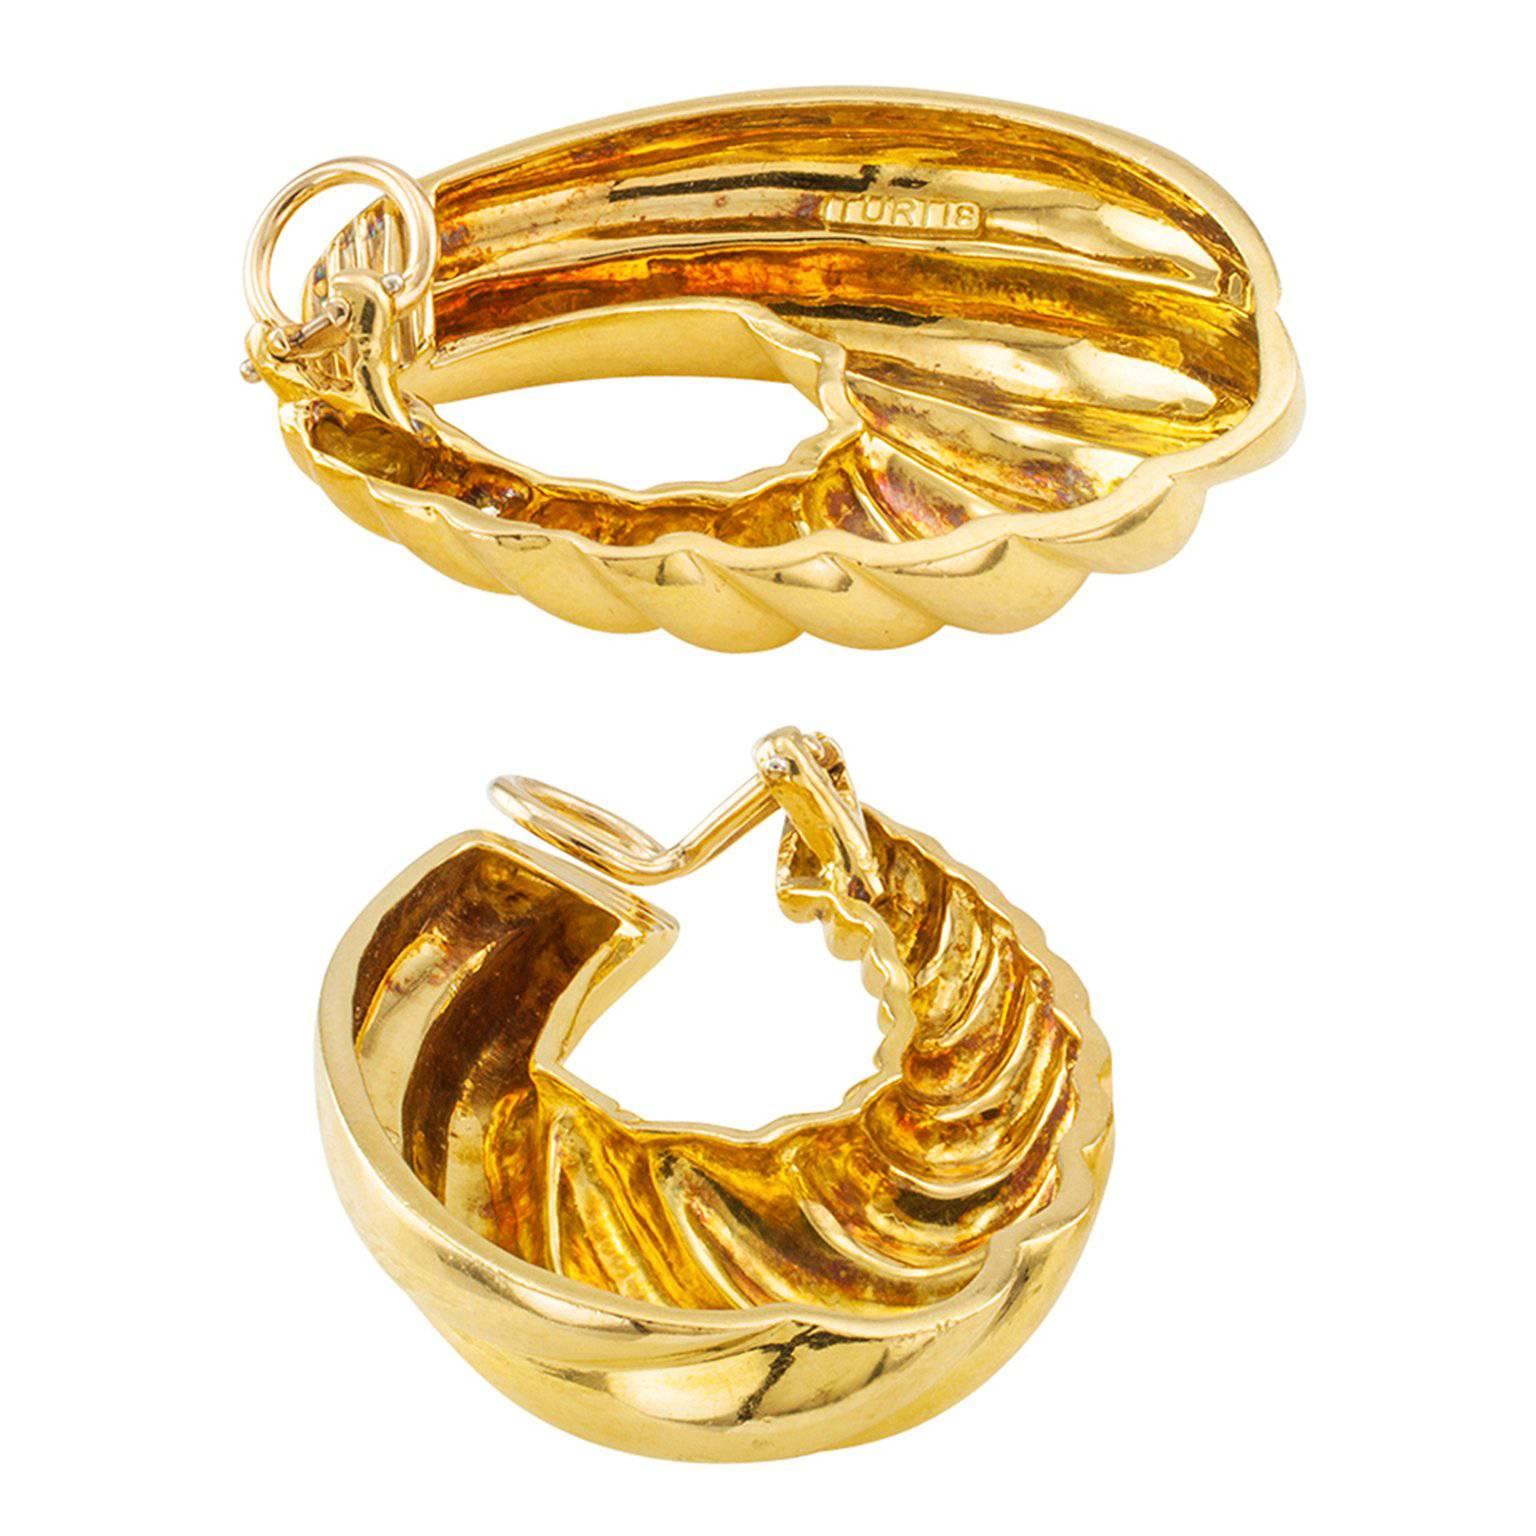 Clip-on Large 18 Karat Gold Hoop Earrings

Large gold clip-back hoops!!!  ...And ladies, you know who you are...  It isn't easy to find these kind of hoops when you really want them.  Do you believe in serendipity?   Because they are clip-back,